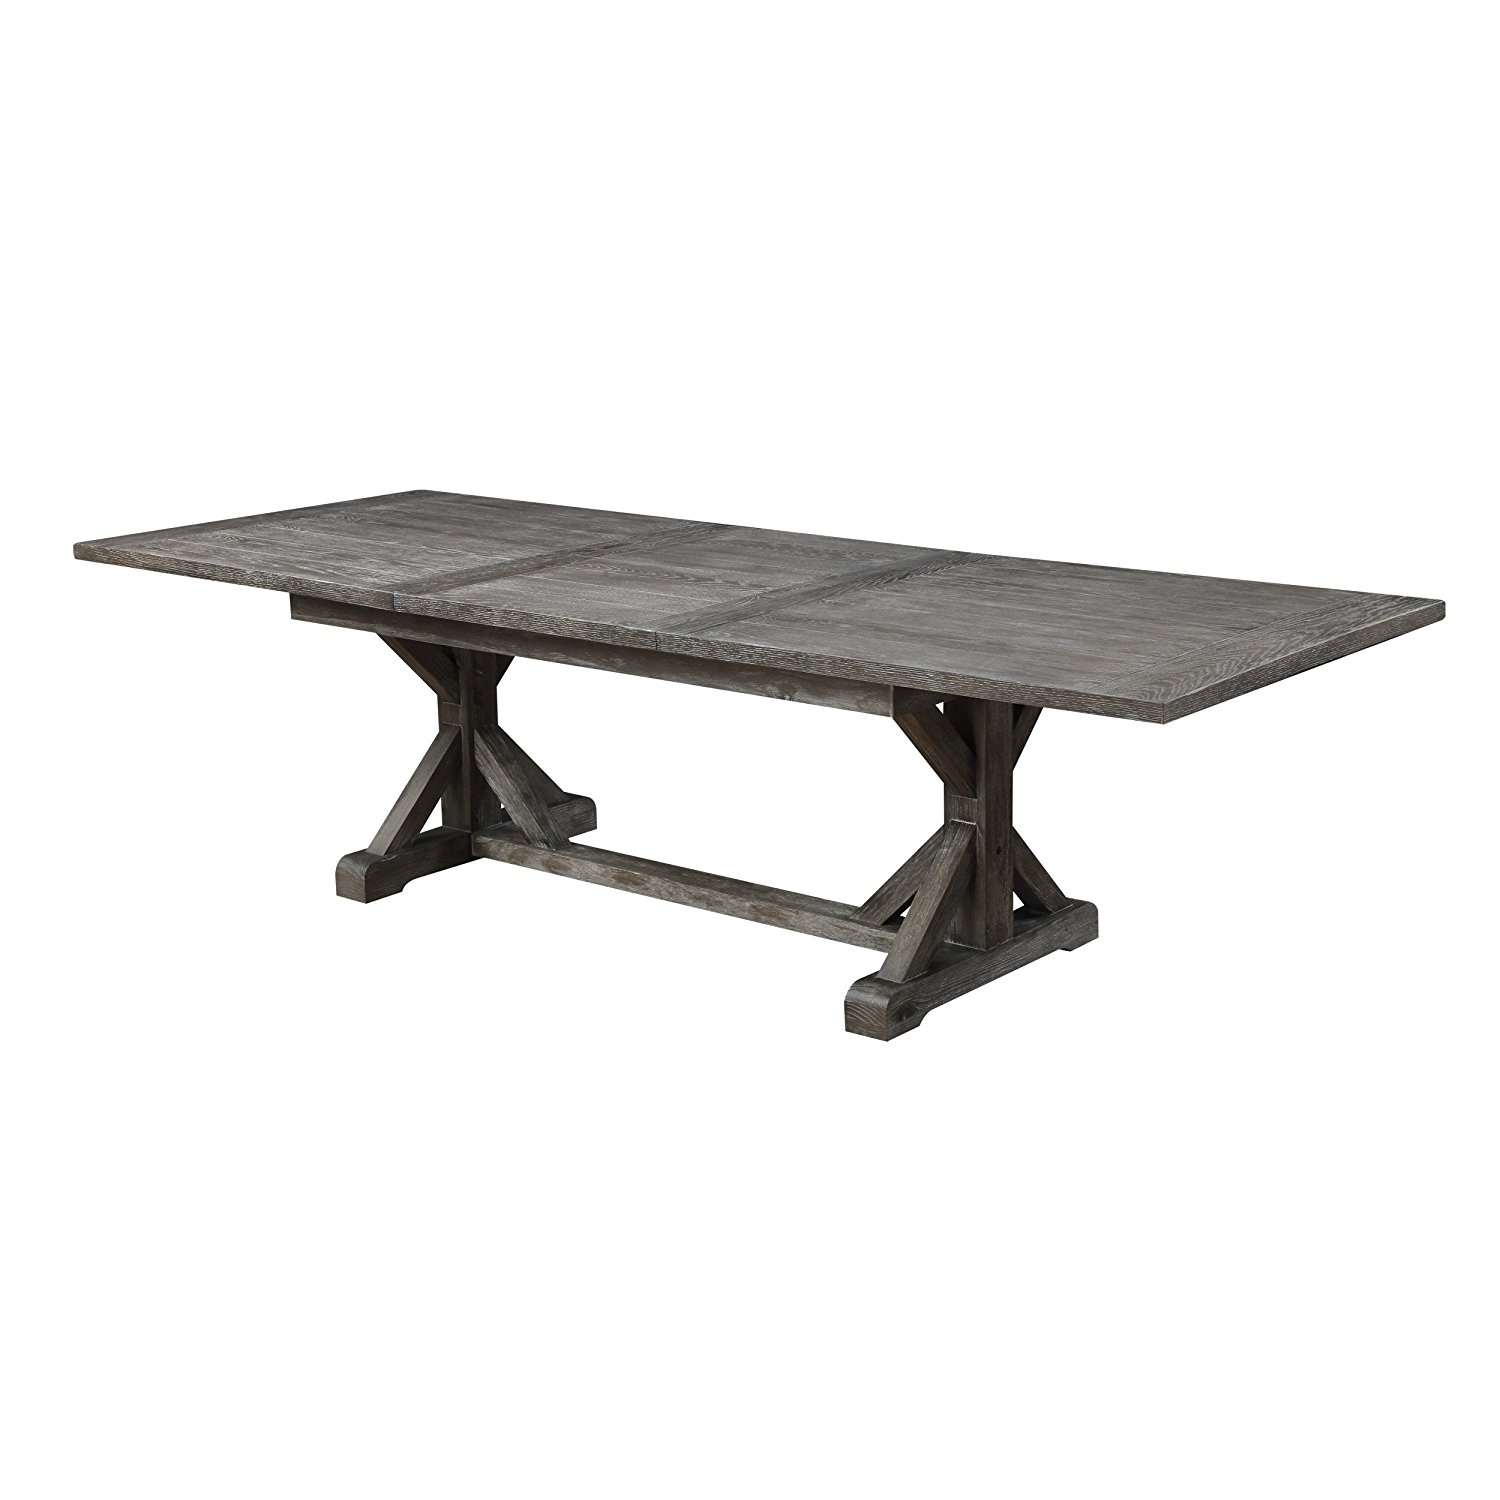 Emerald Home Furnishings Paladin Dining Table with 28" Butterfly Leaf, Standard, Rustic Charcoal